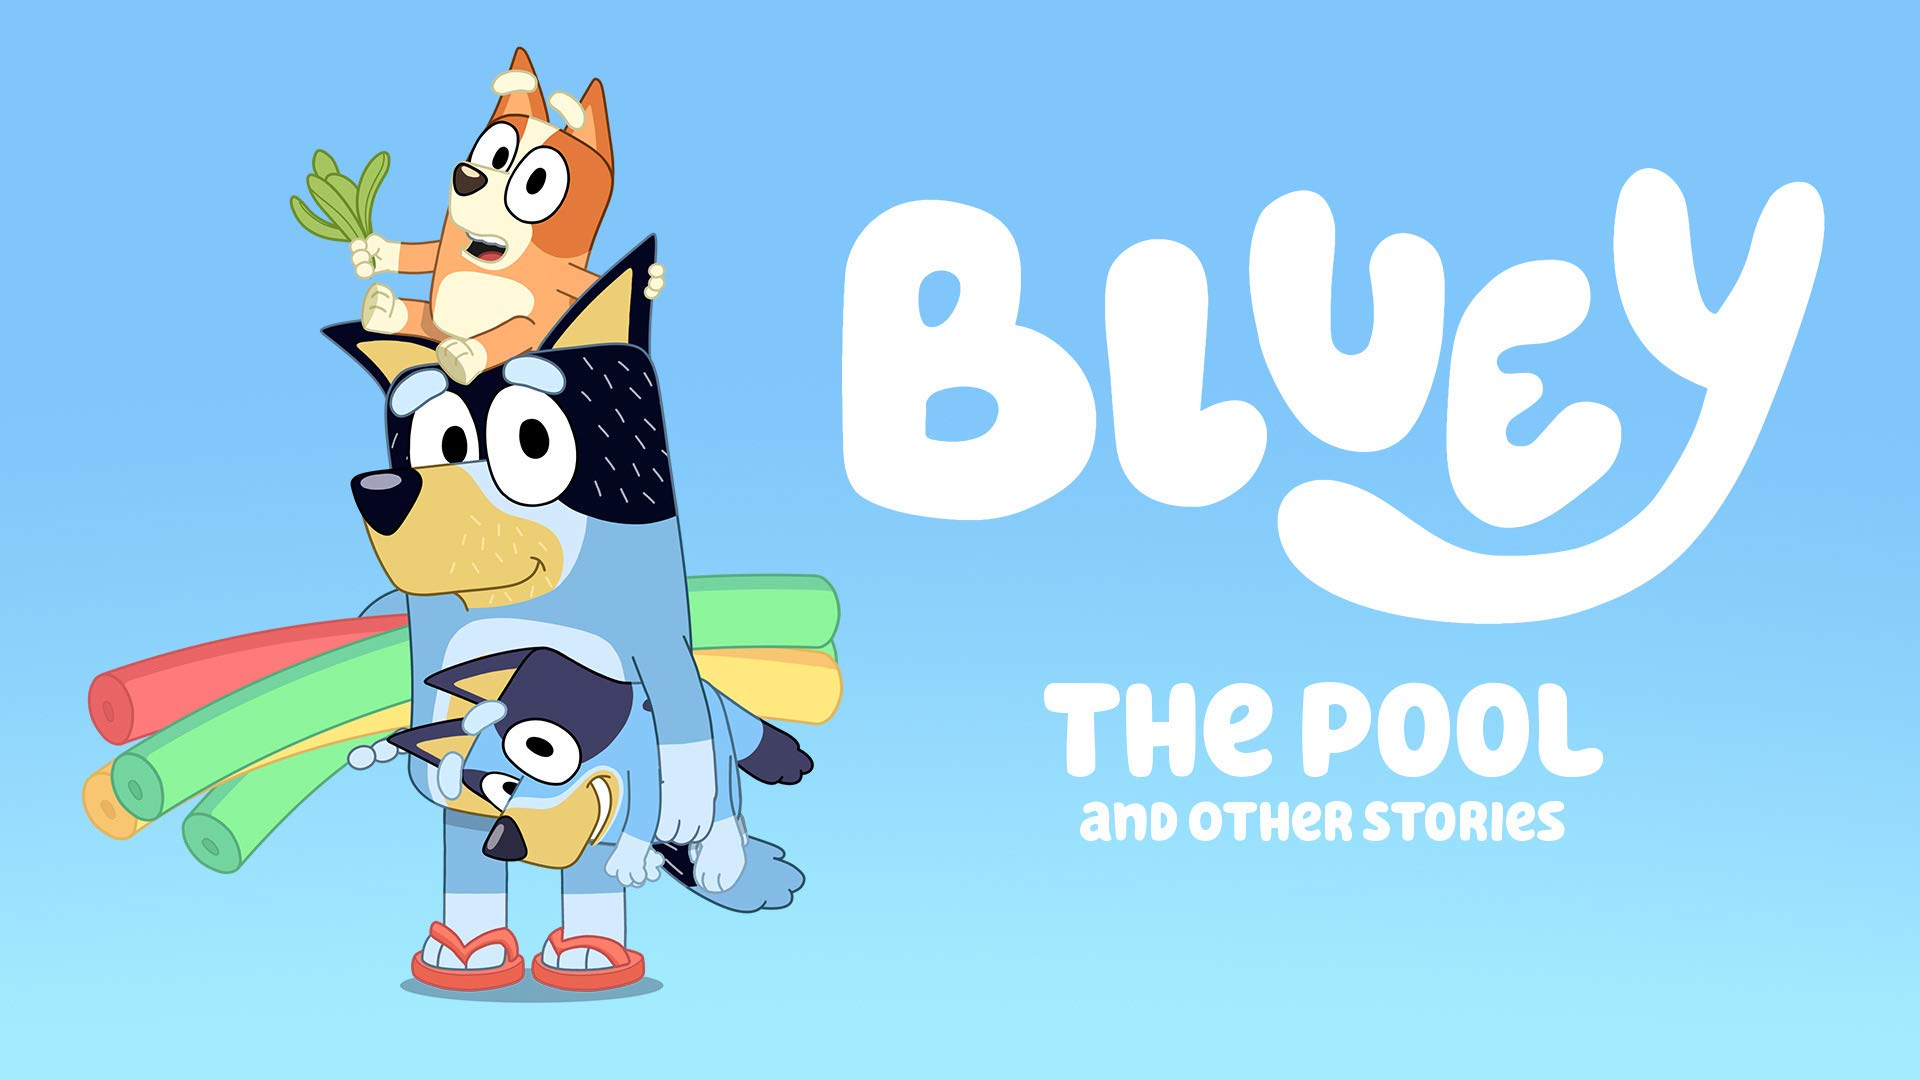 Watch Bluey, The Pool and Other Stories